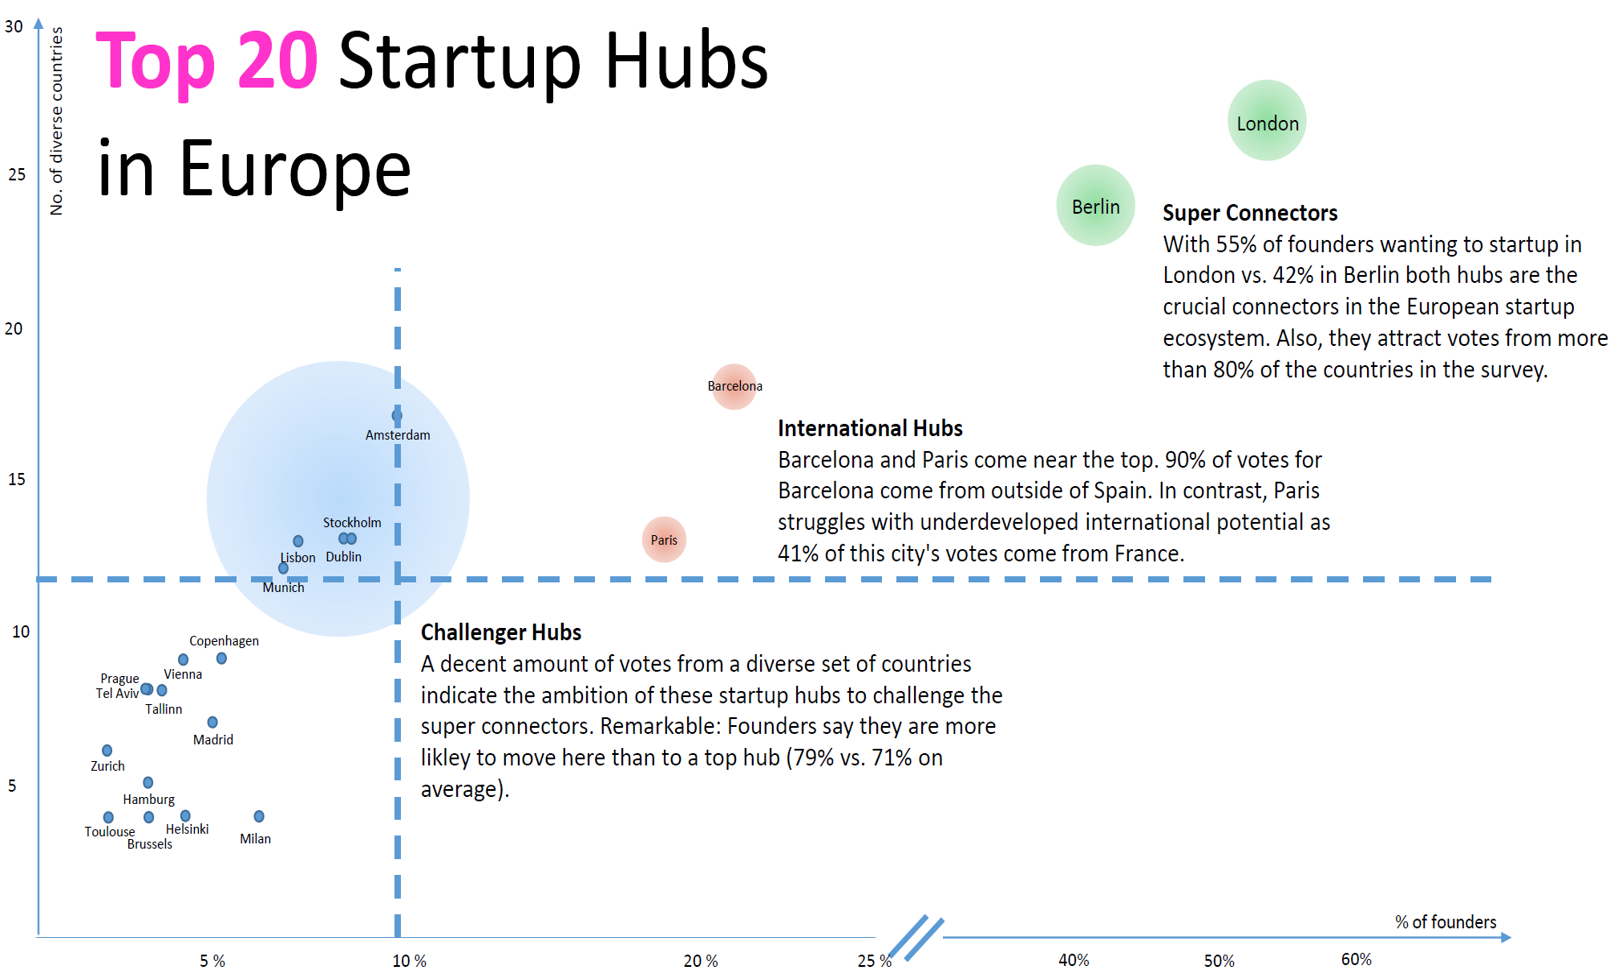 Top 20 Startup Hubs according to founders - Startup Heatmap Europe 2017